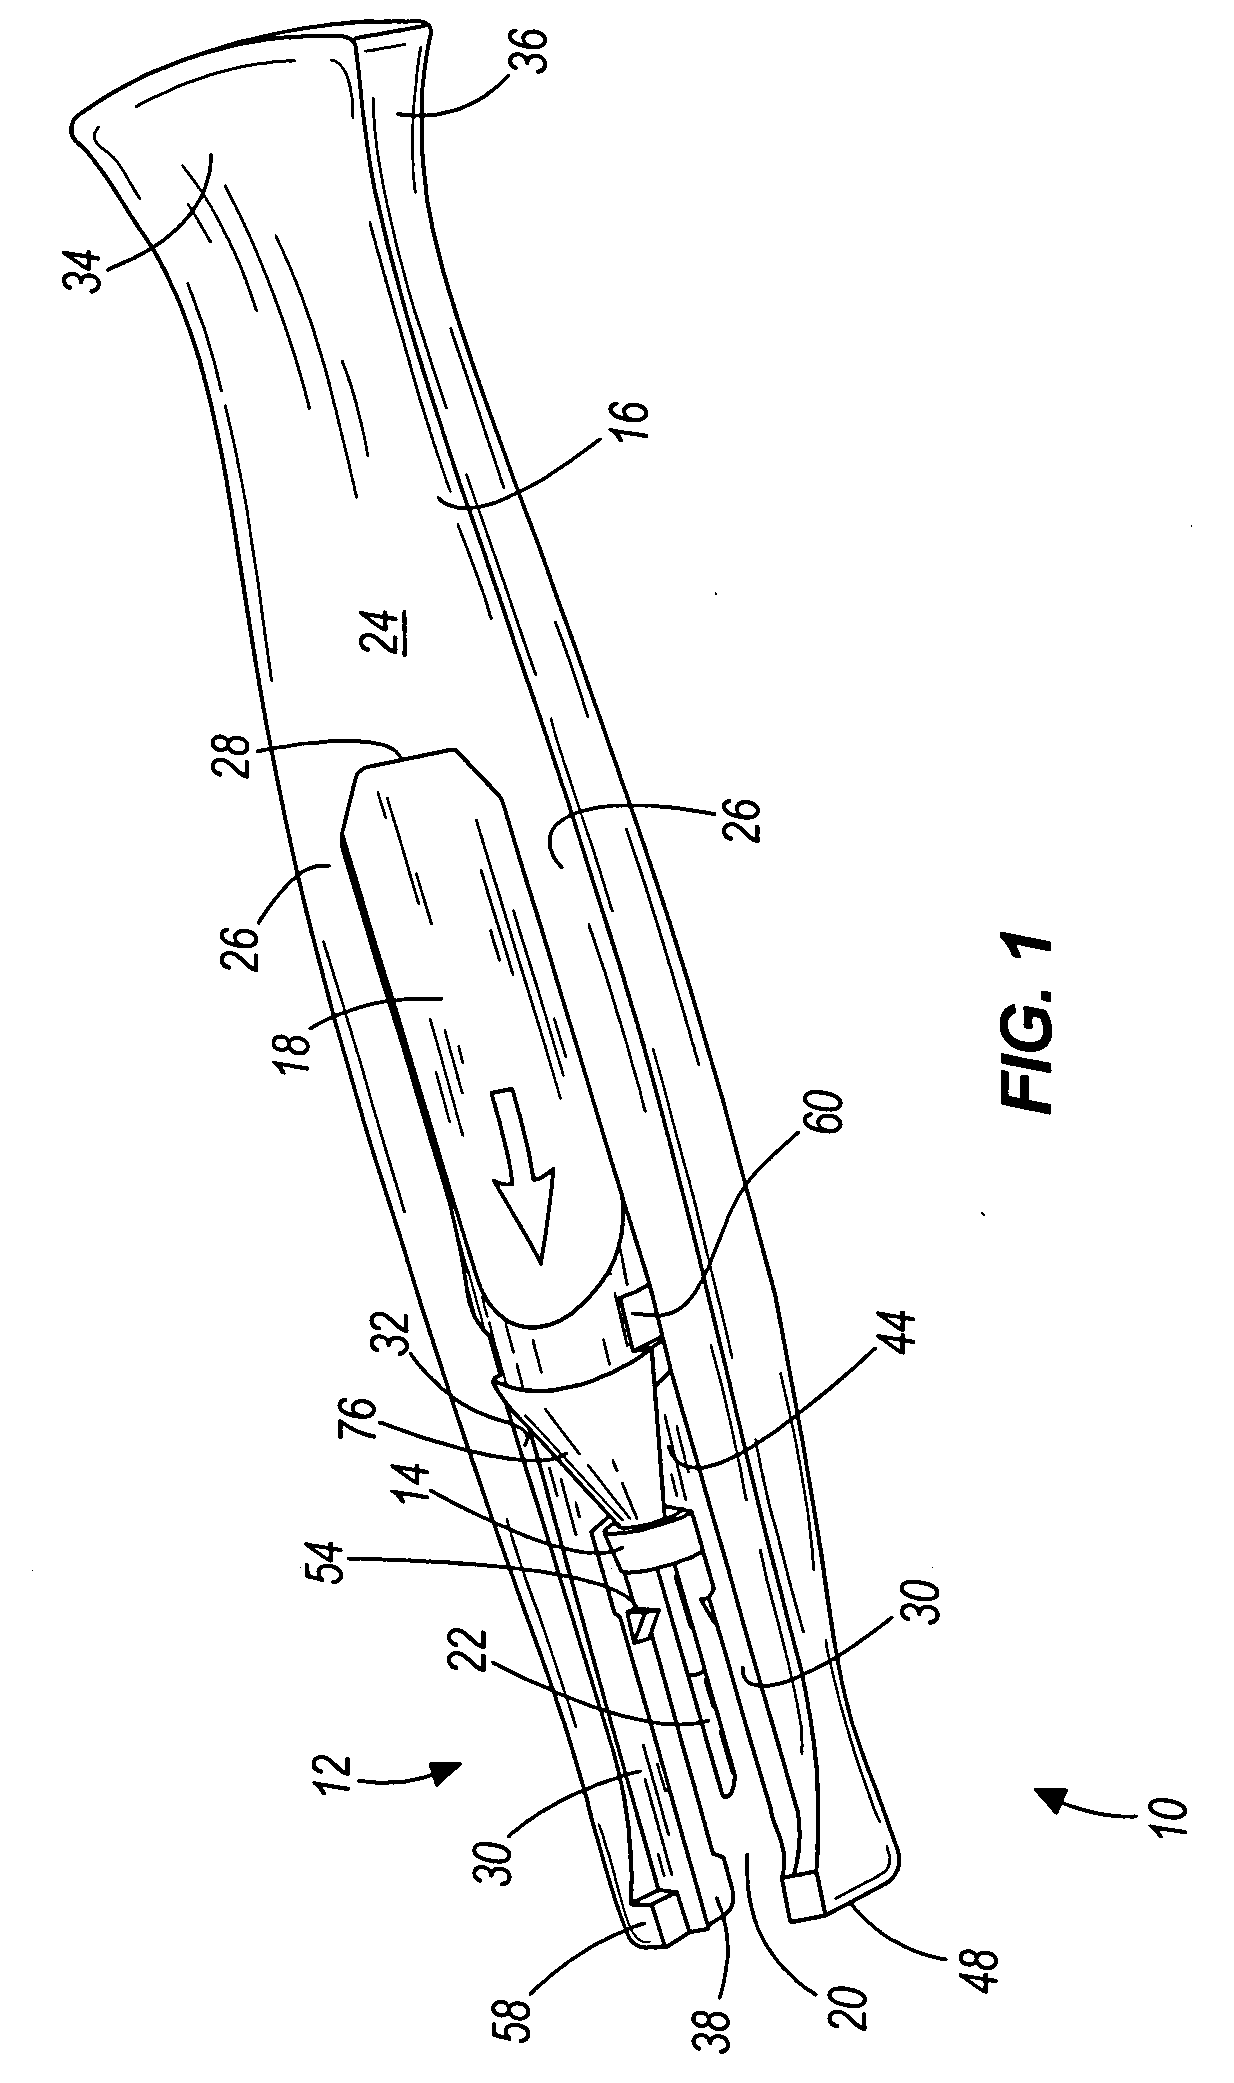 Ophthalmic cannula insertion tool and method